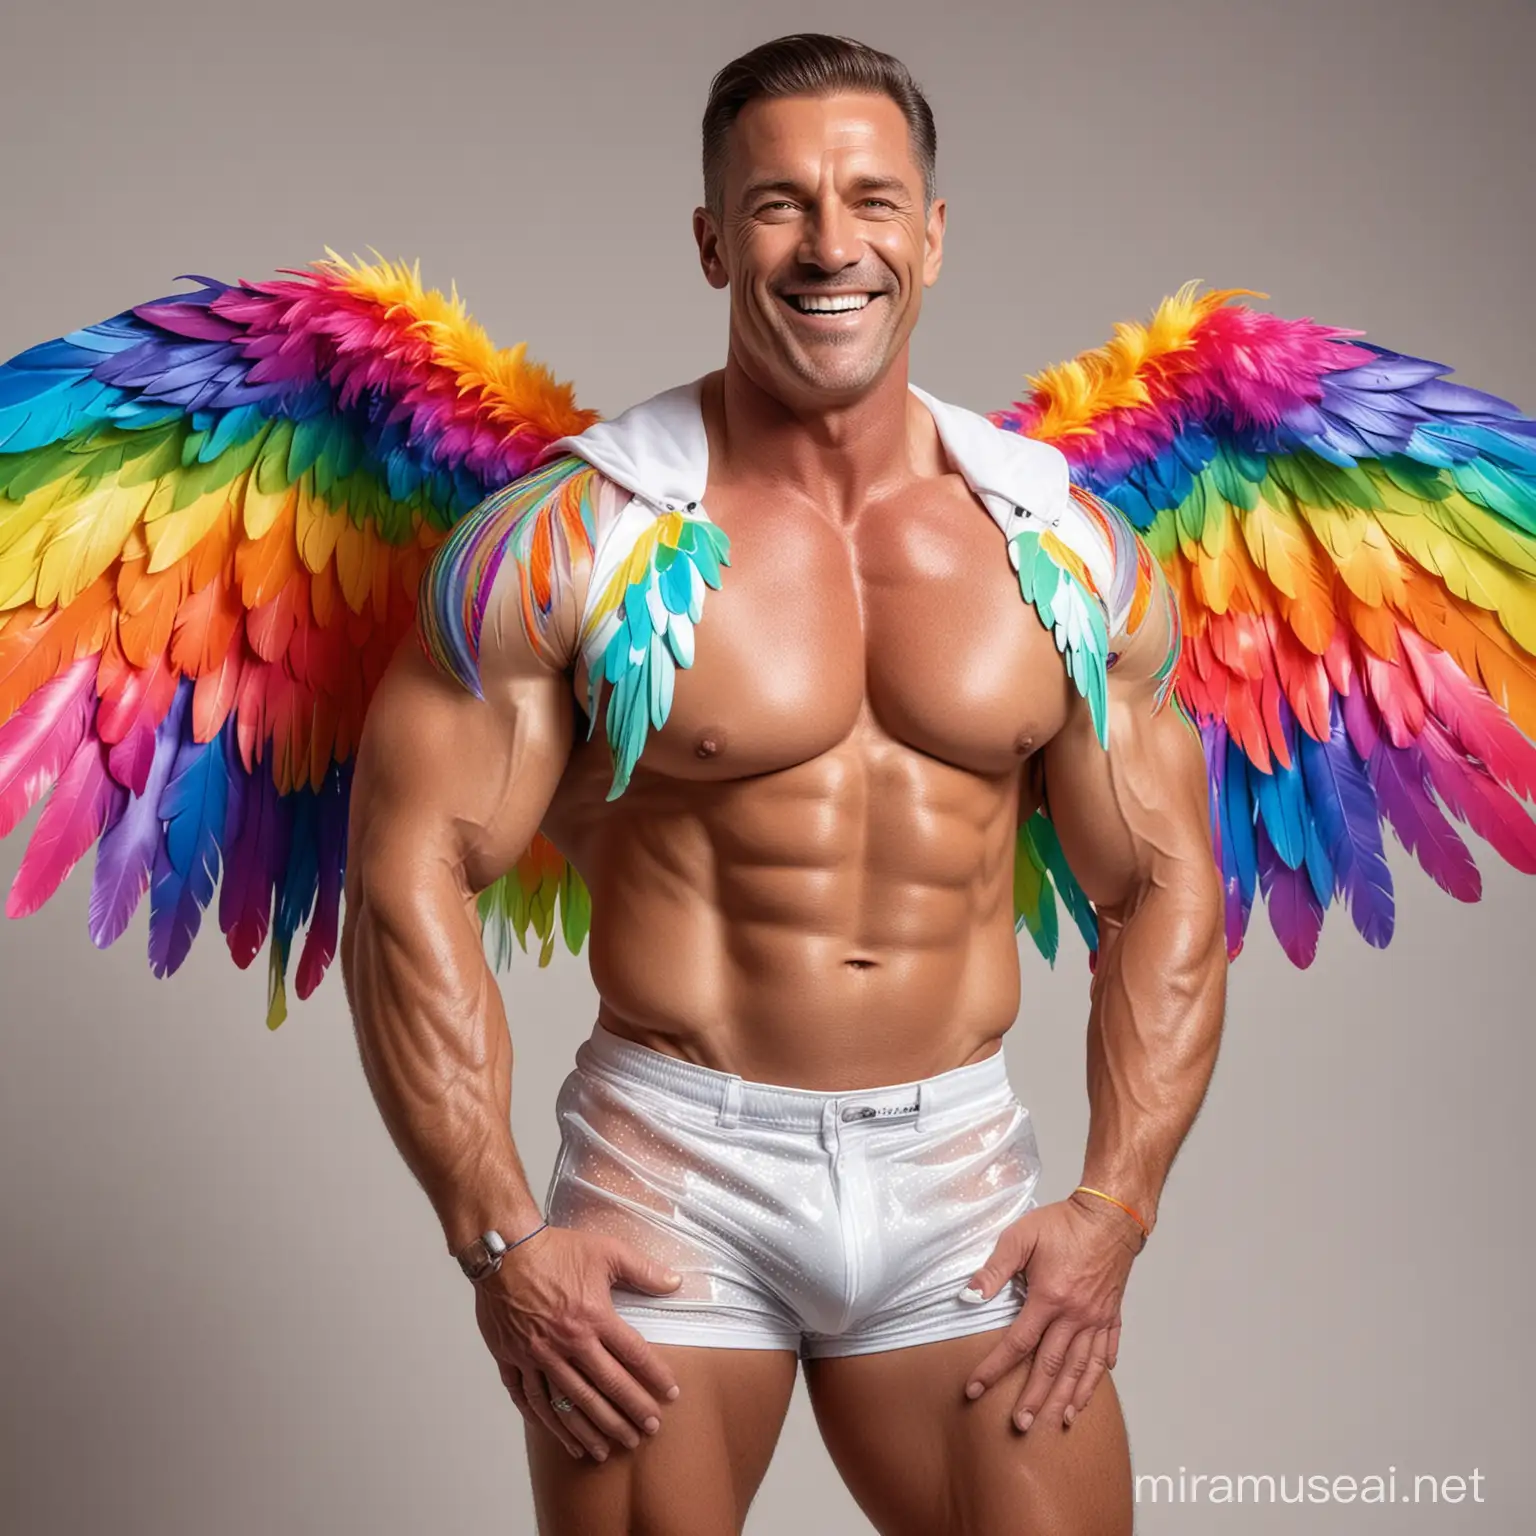 Smiling 40s Bodybuilder Daddy Flexing in Colorful Eagle Wings Jacket